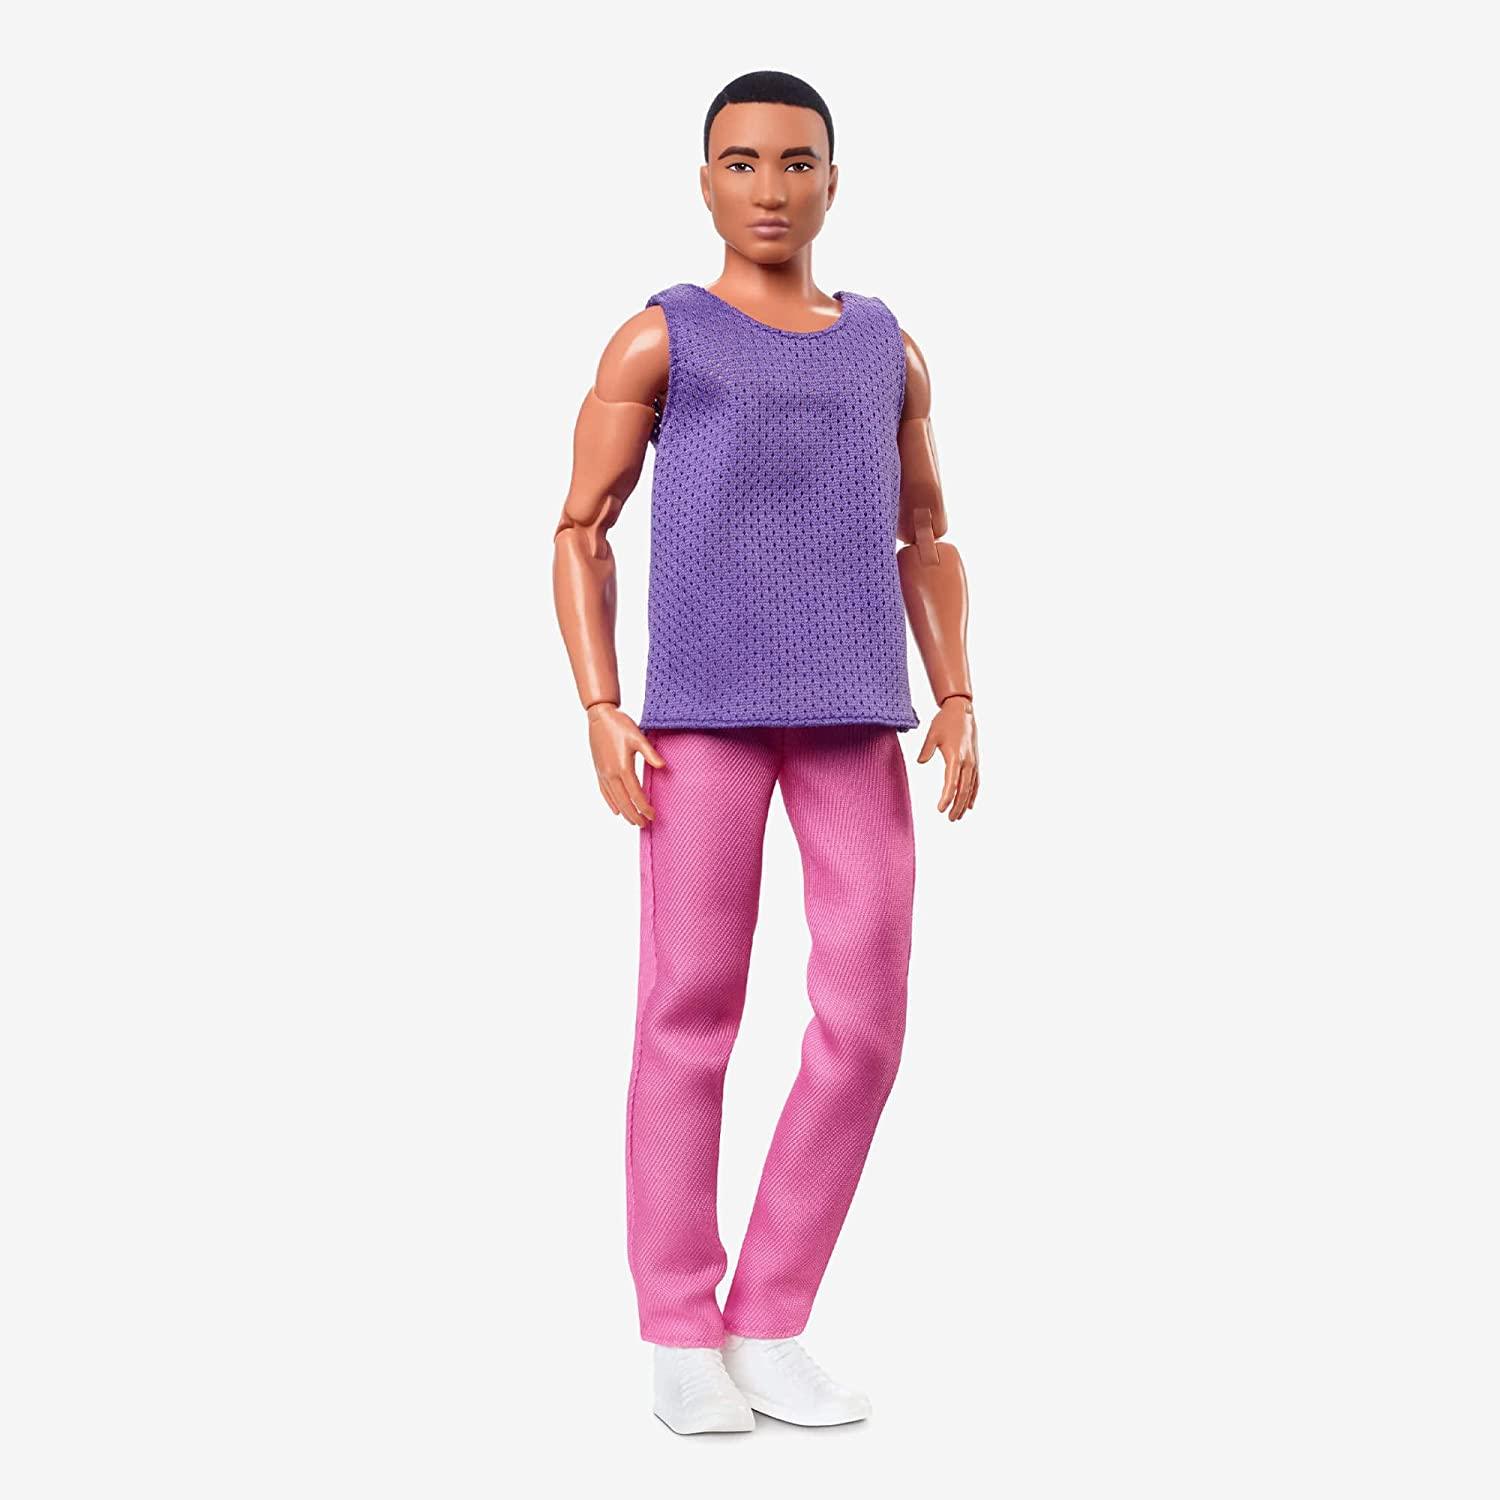 Ken Doll, Barbie Looks, Black Hair, Color Block Outfit, Purple Mesh Top with Pink Pants, Style and Pose, Fashion Collectibles - BumbleToys - 5-7 Years, Barbie, Barbie Looks, Fashion Dolls & Accessories, Girls, Pre-Order